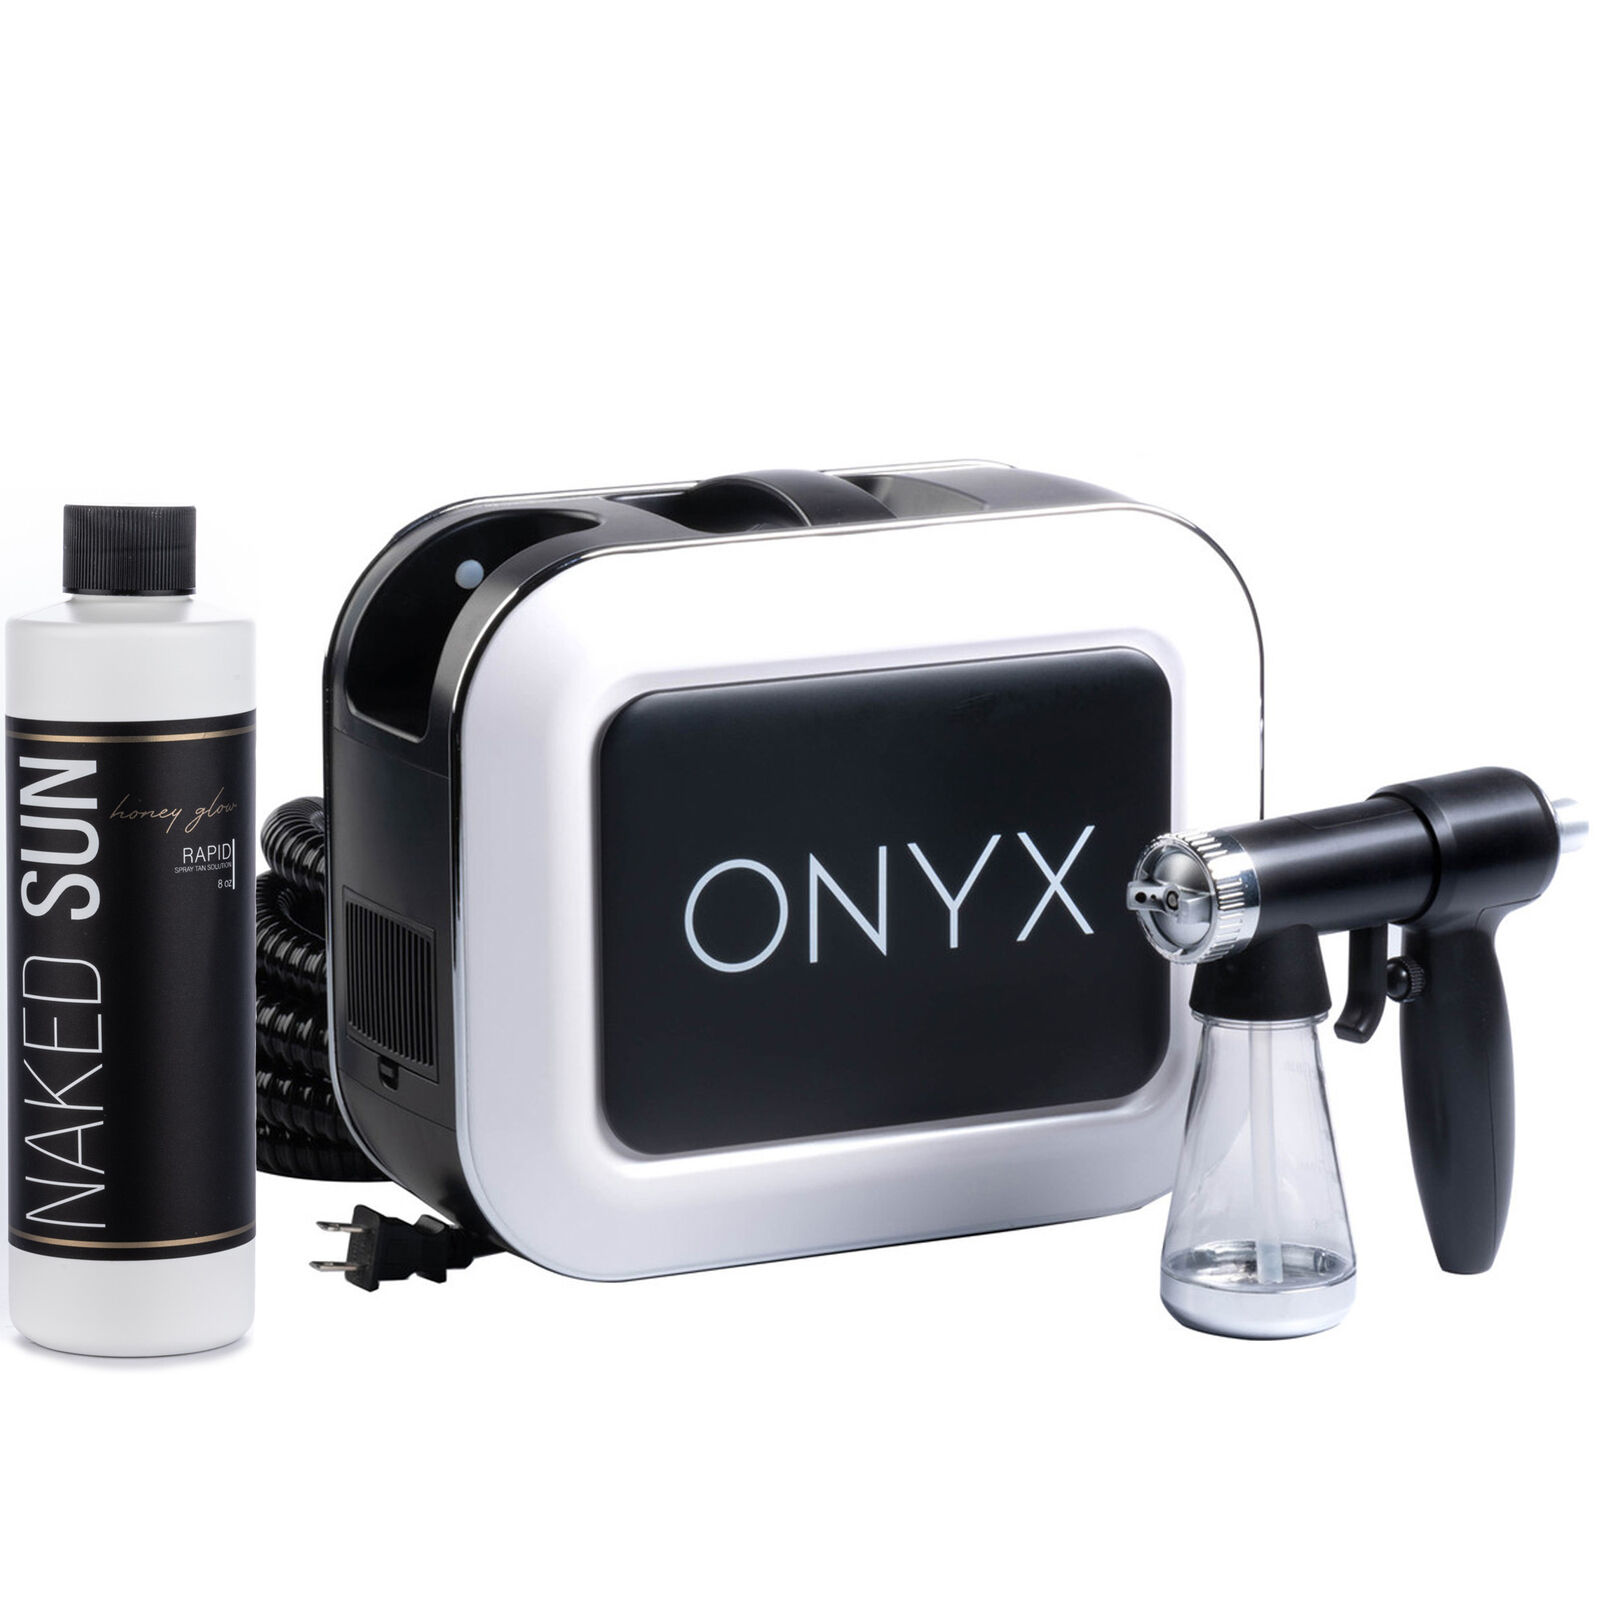 Naked Sun Onyx Spray Tan Machine With Honey Glow Rapid Develop Tanning Solution